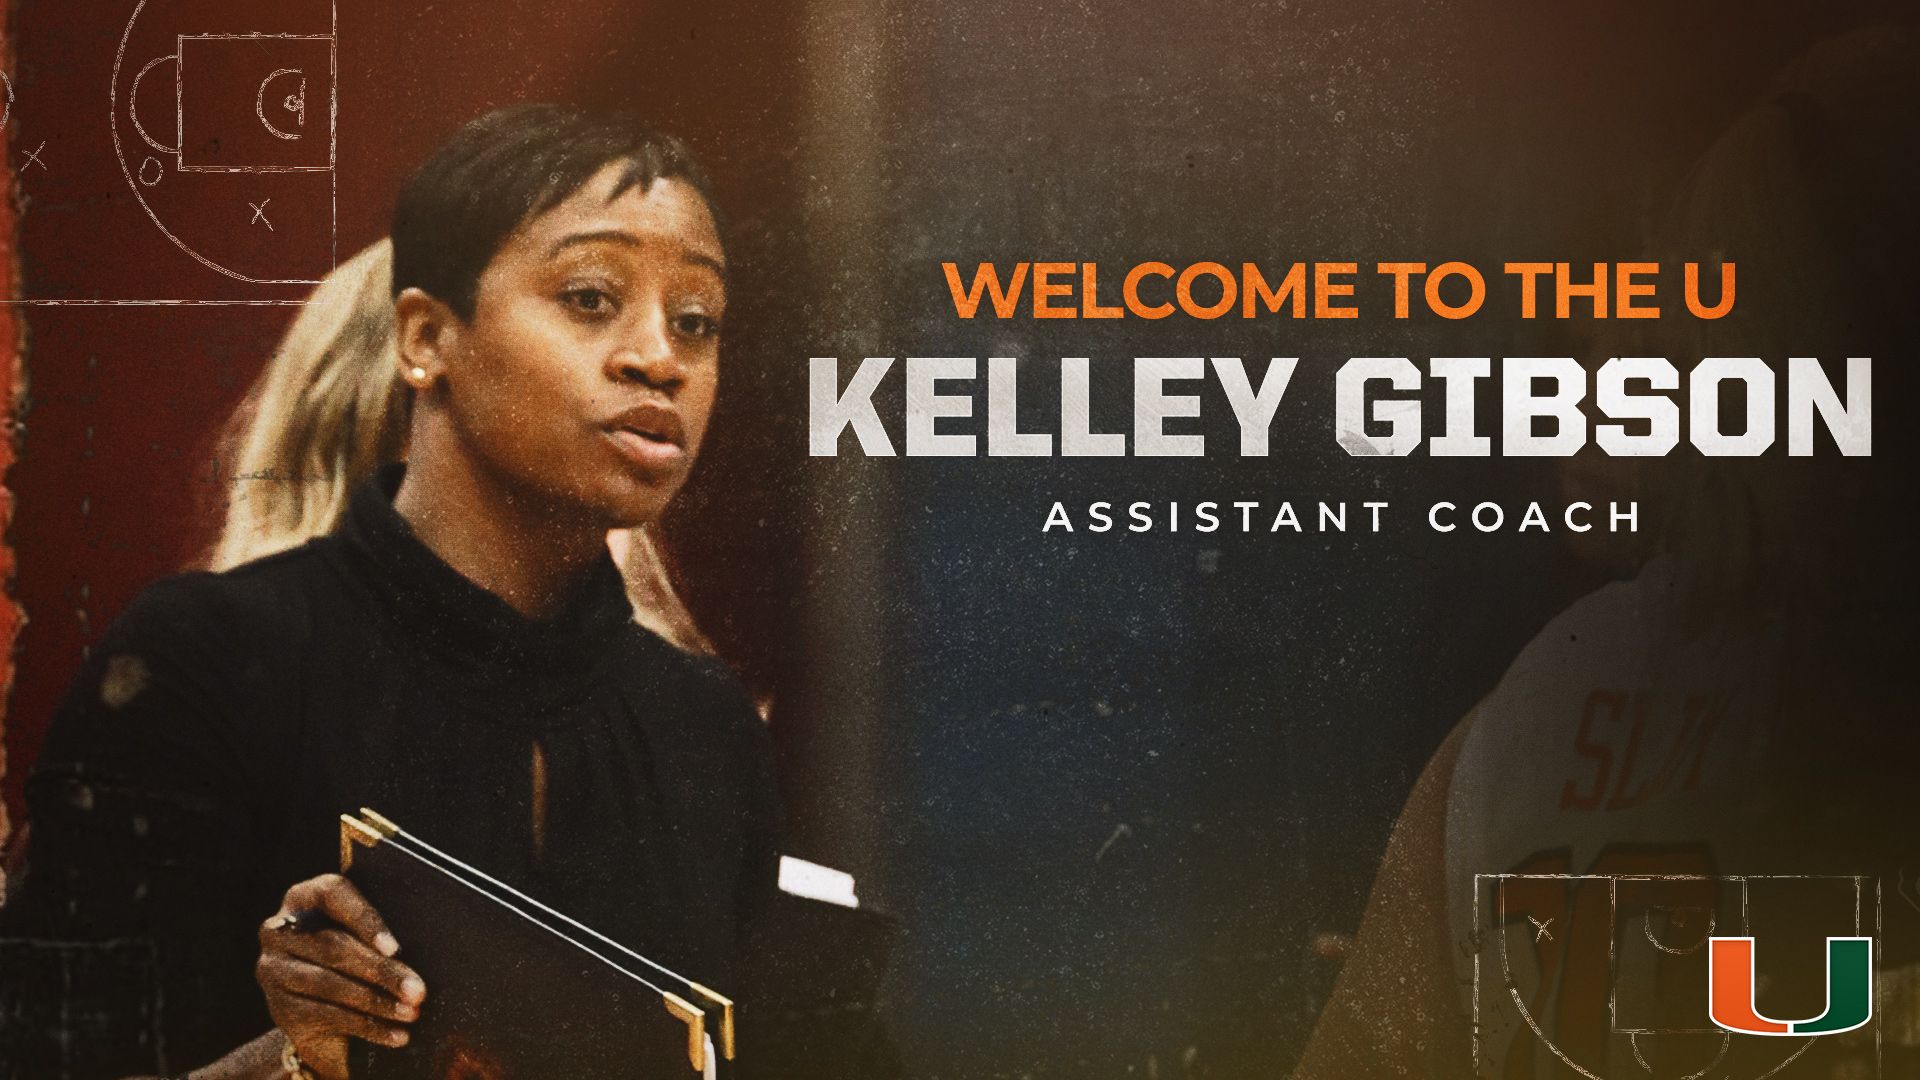 Kelley Gibson Joins WBB Staff